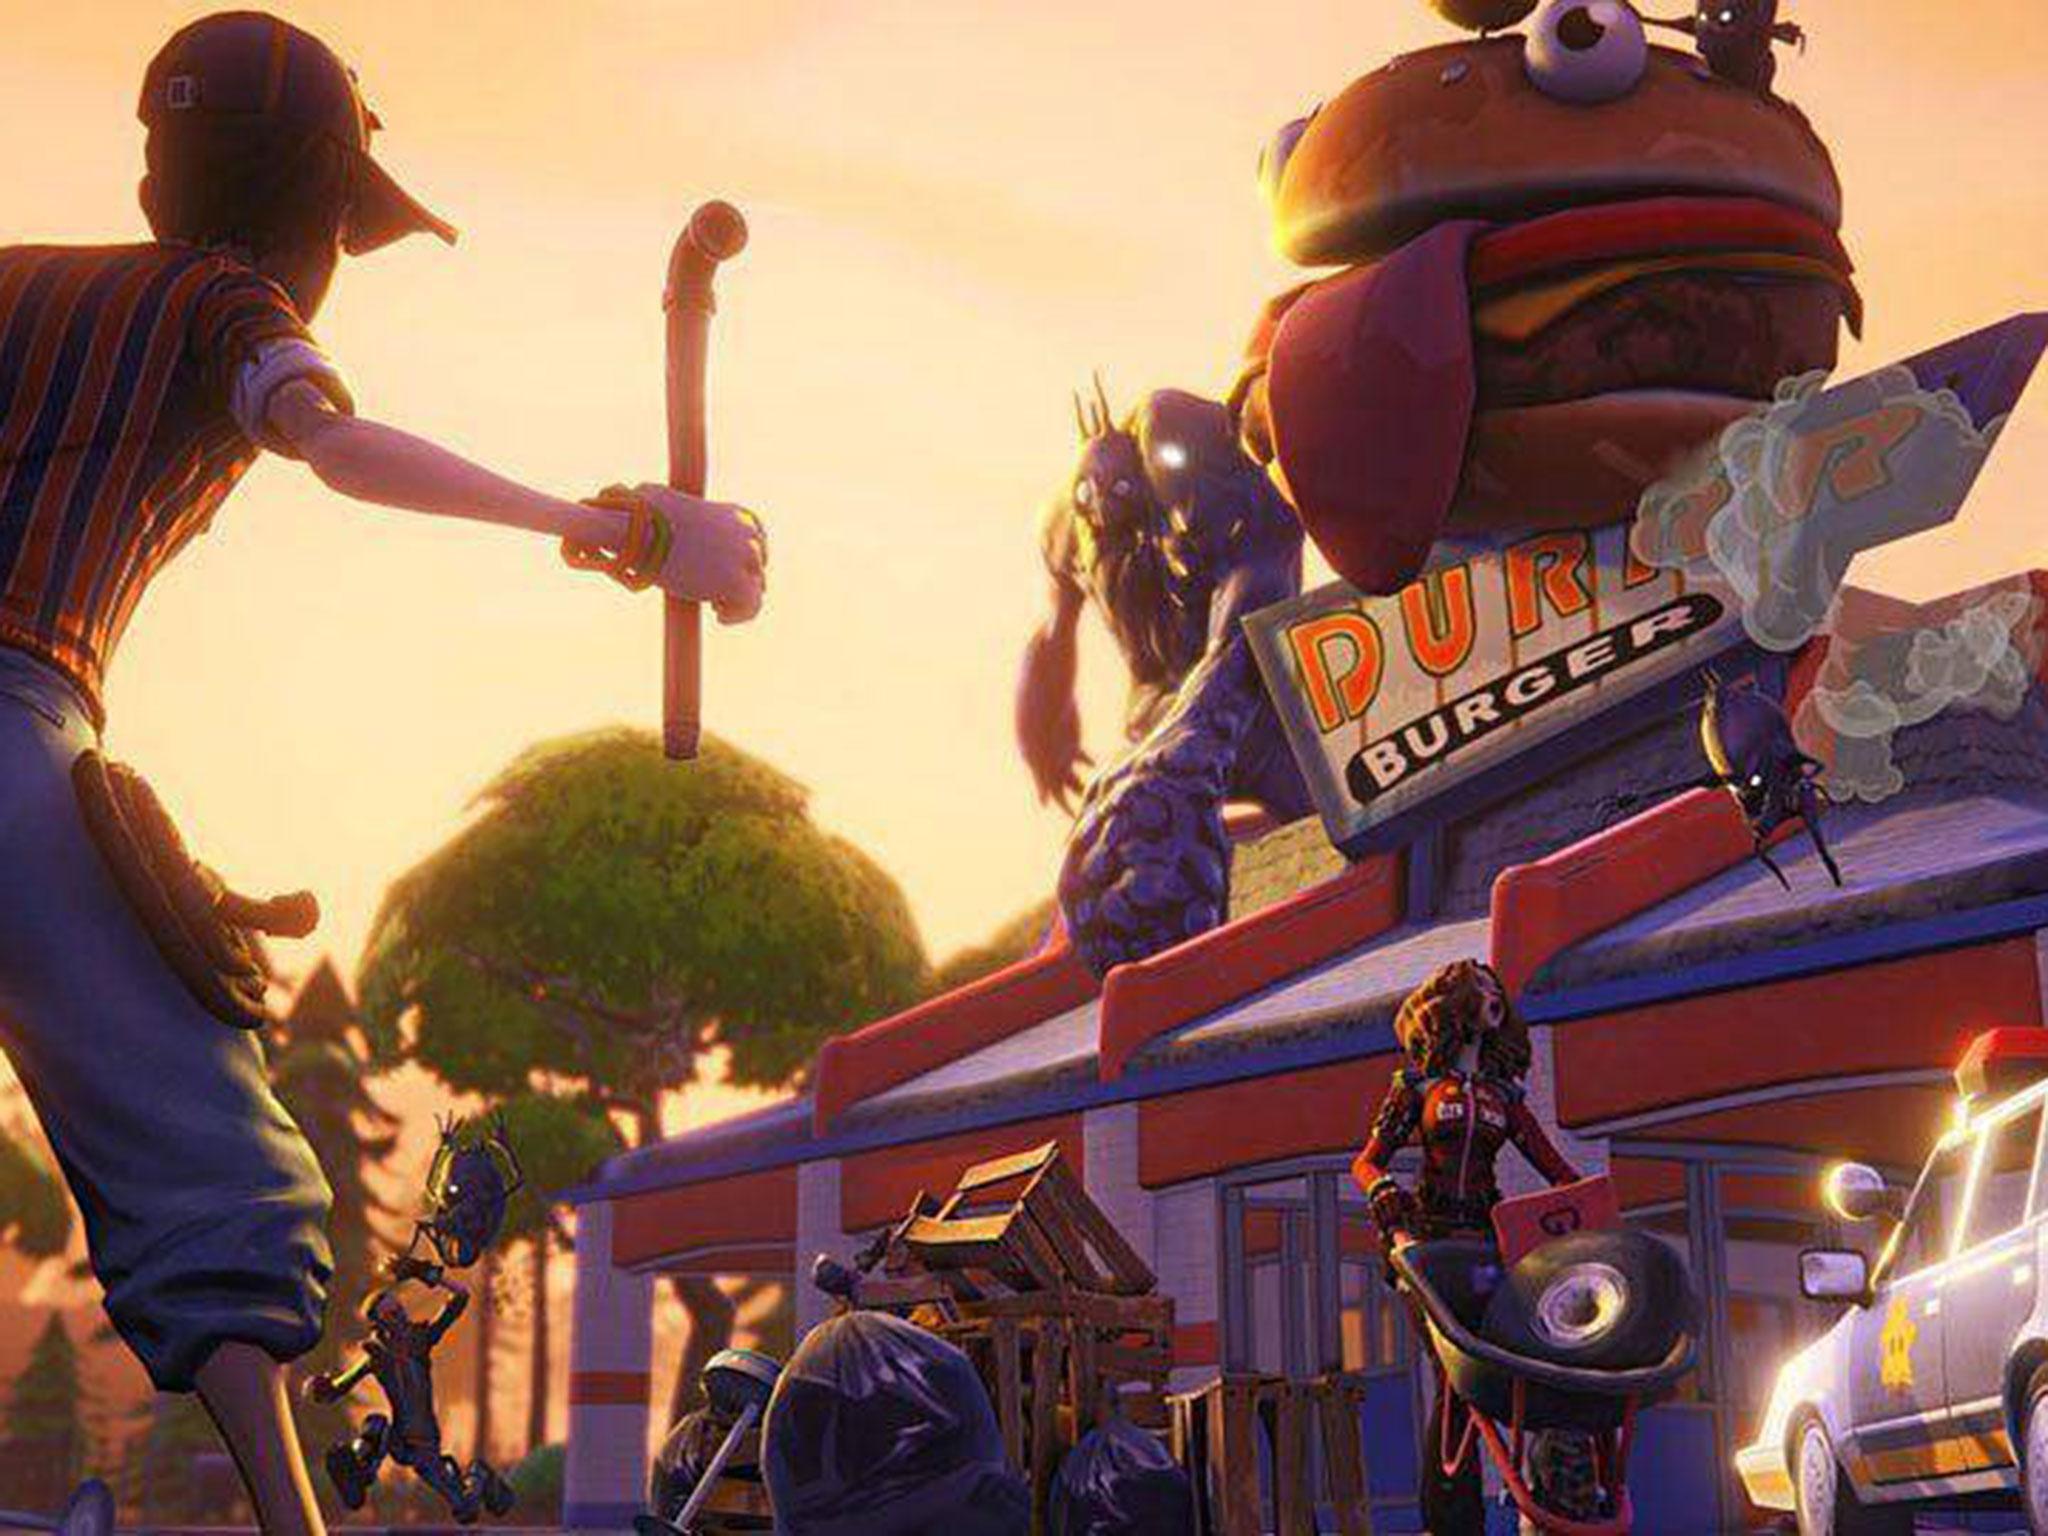 Games Like Fortnite Use Predatory Gambling Techniques To Make - fortnite a video game that has become easily the most popular of 2018 and has